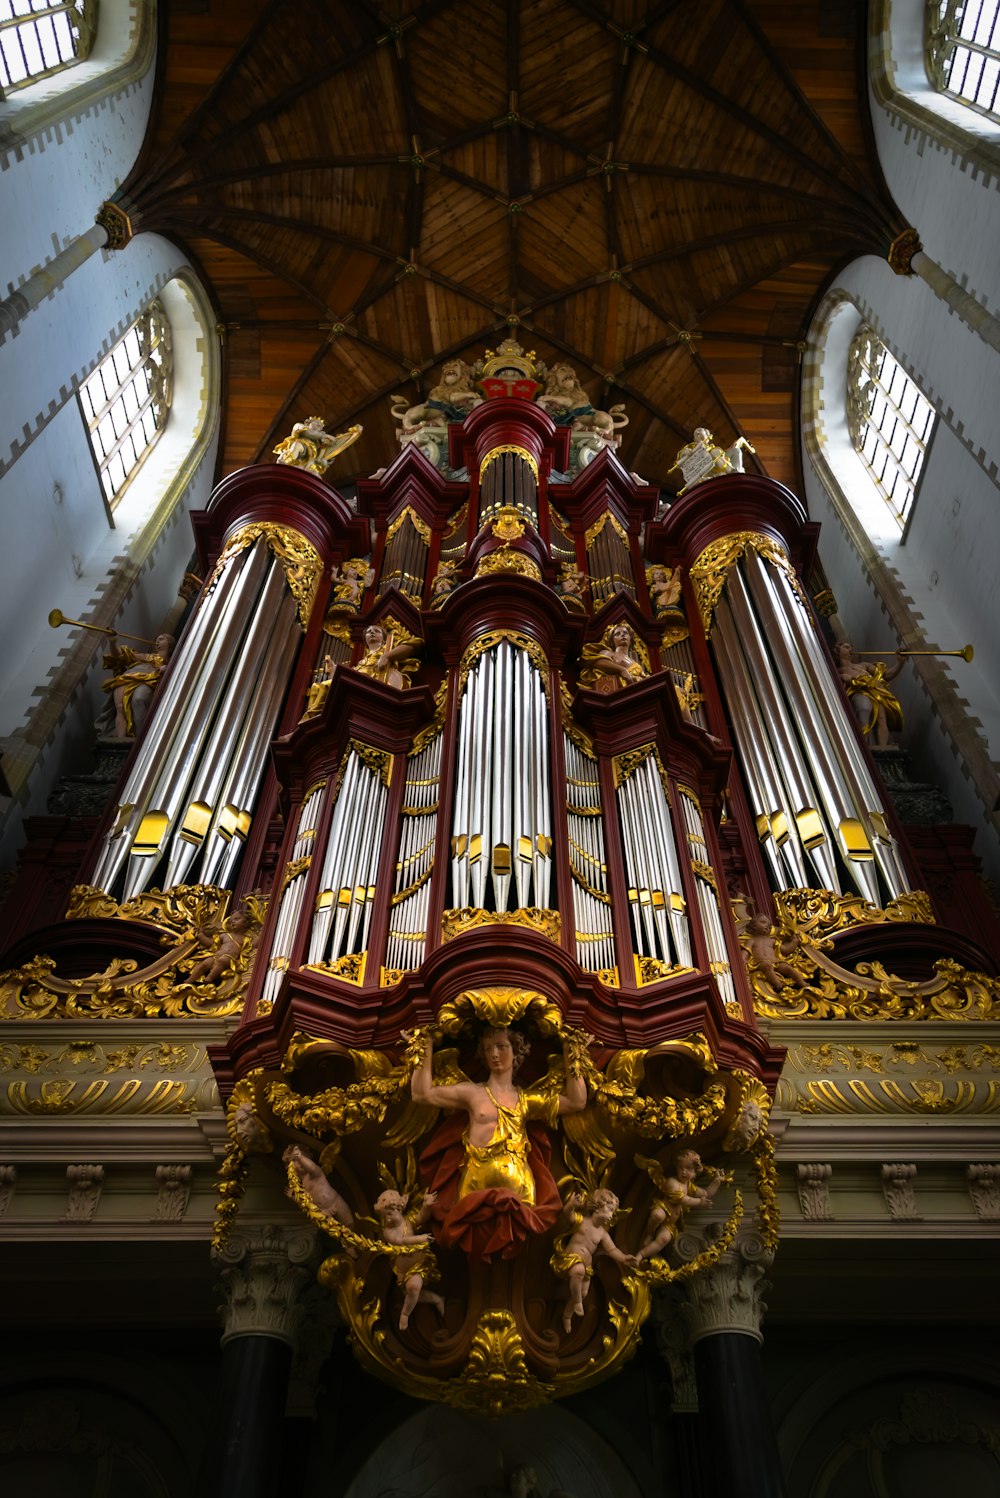 a large pipe organ in a church with a statue of a woman